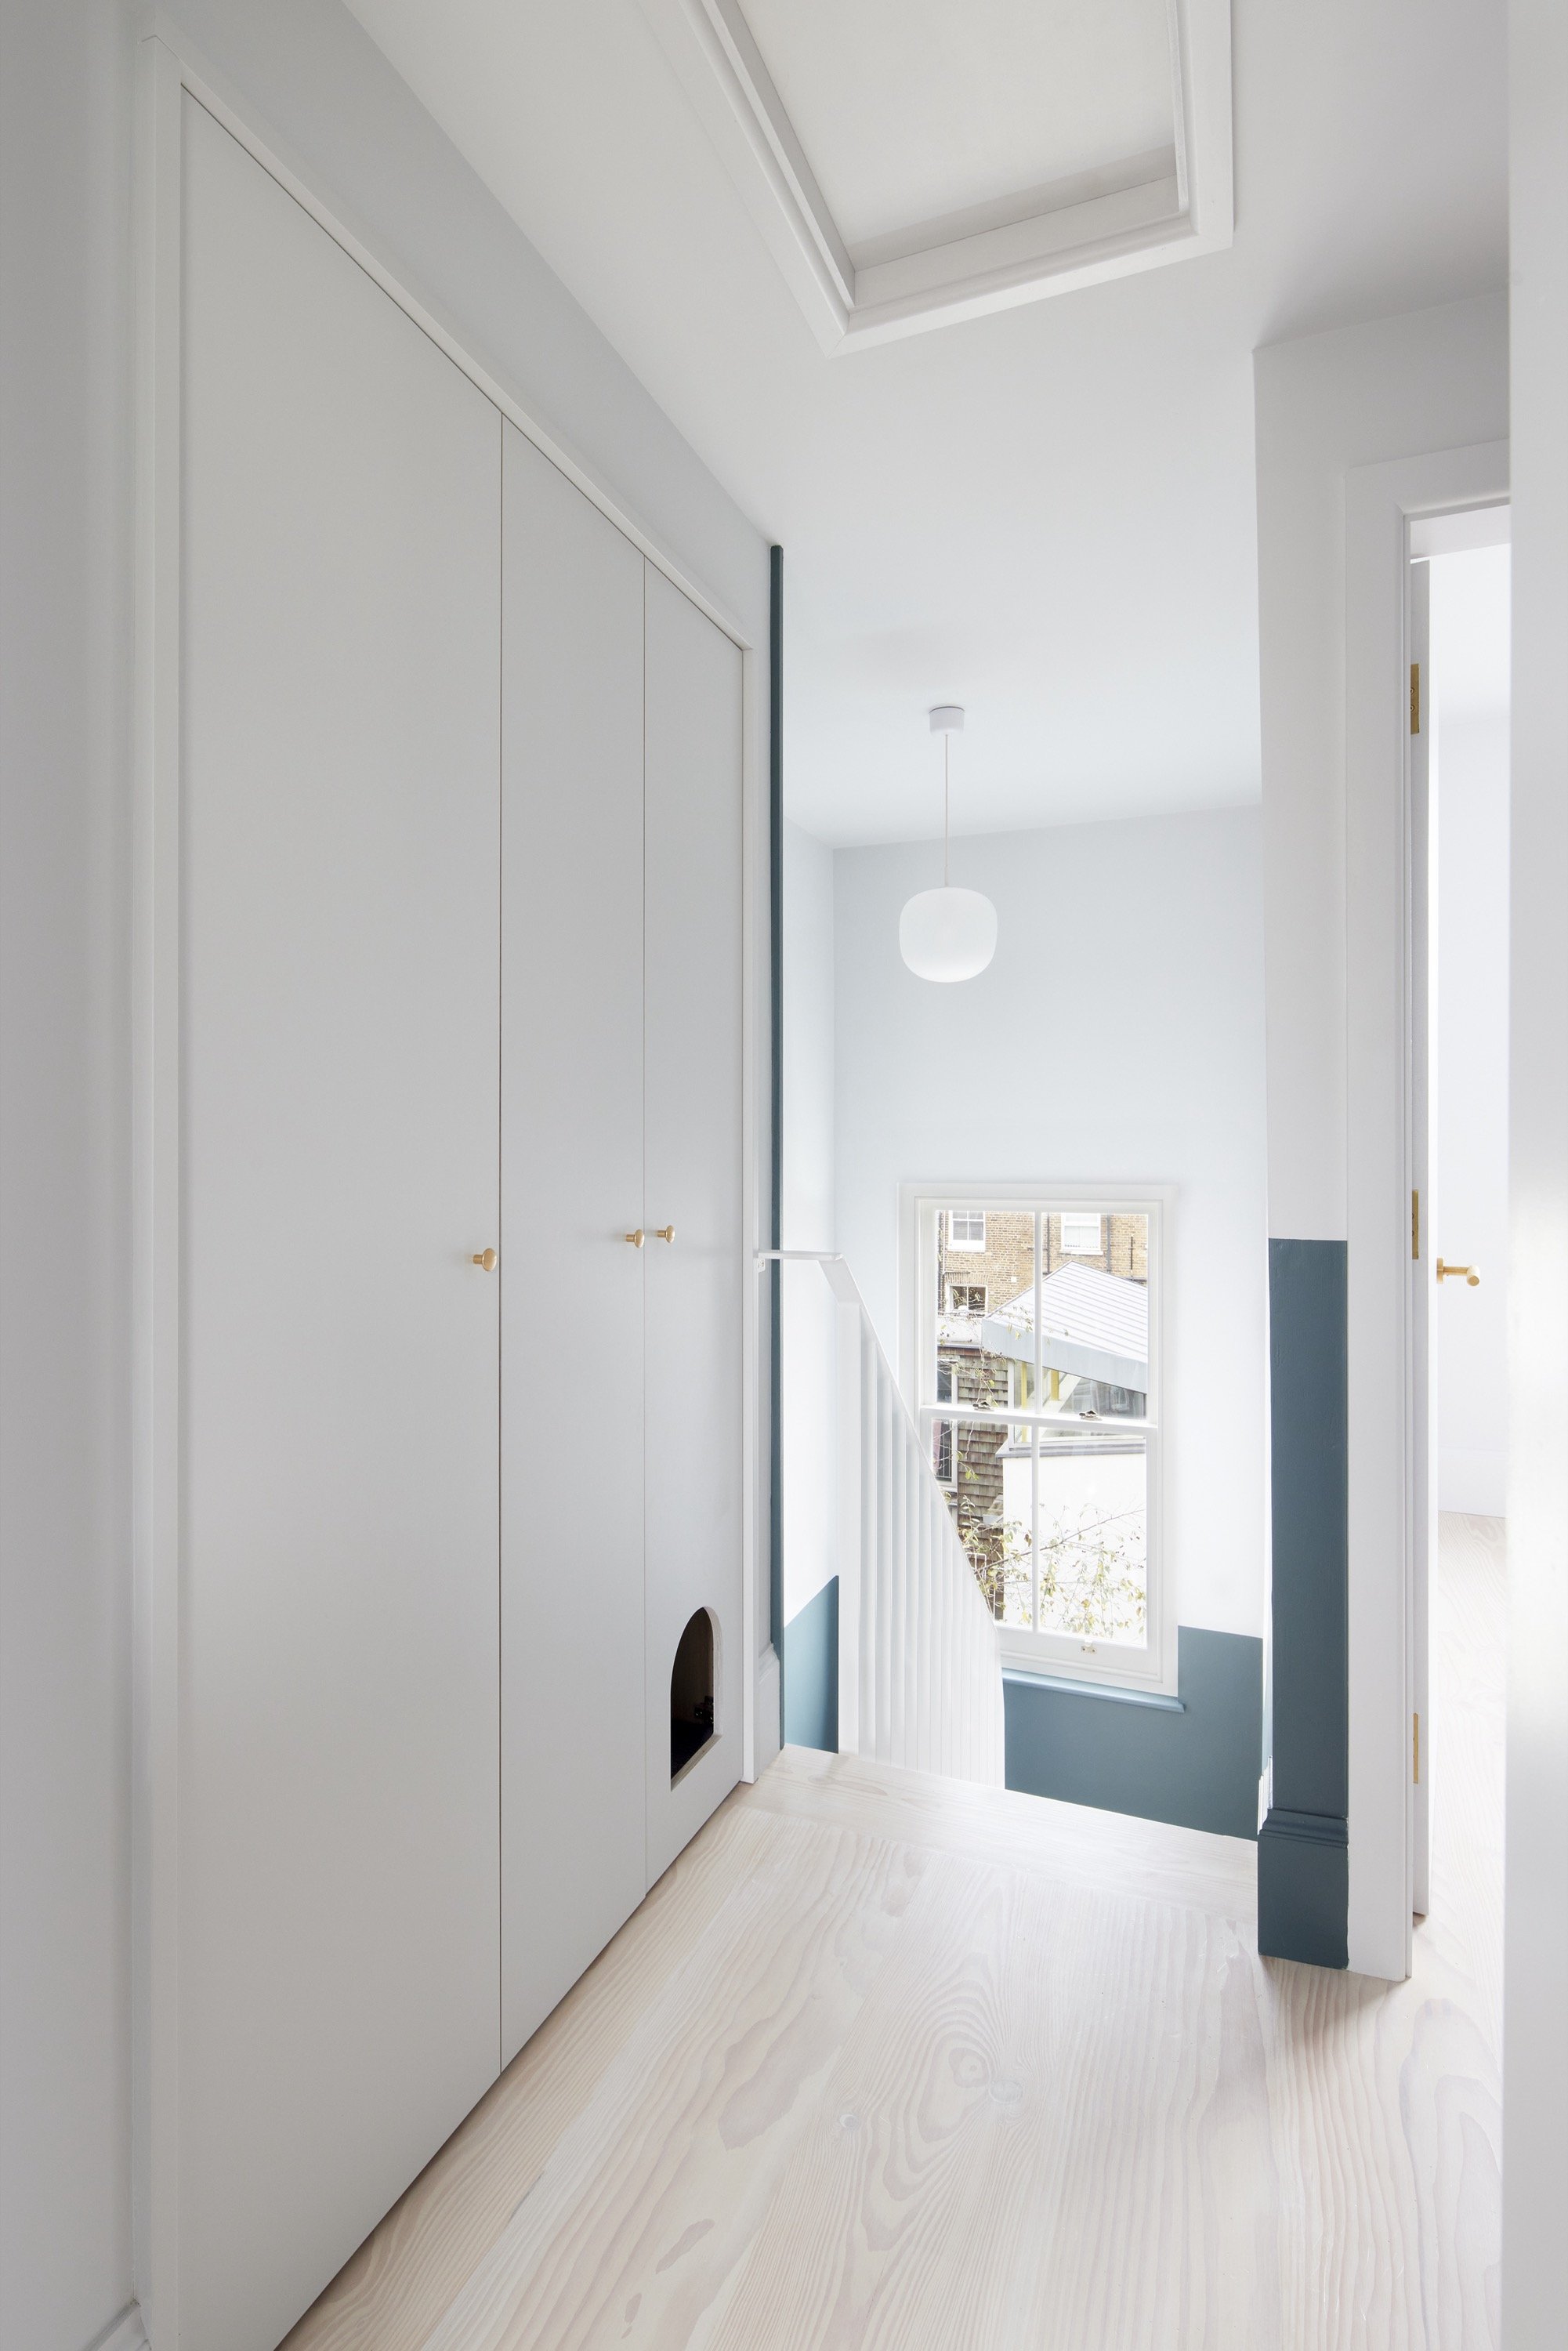 Maison Pour Dodo is a north London flat with a spectrum of storage